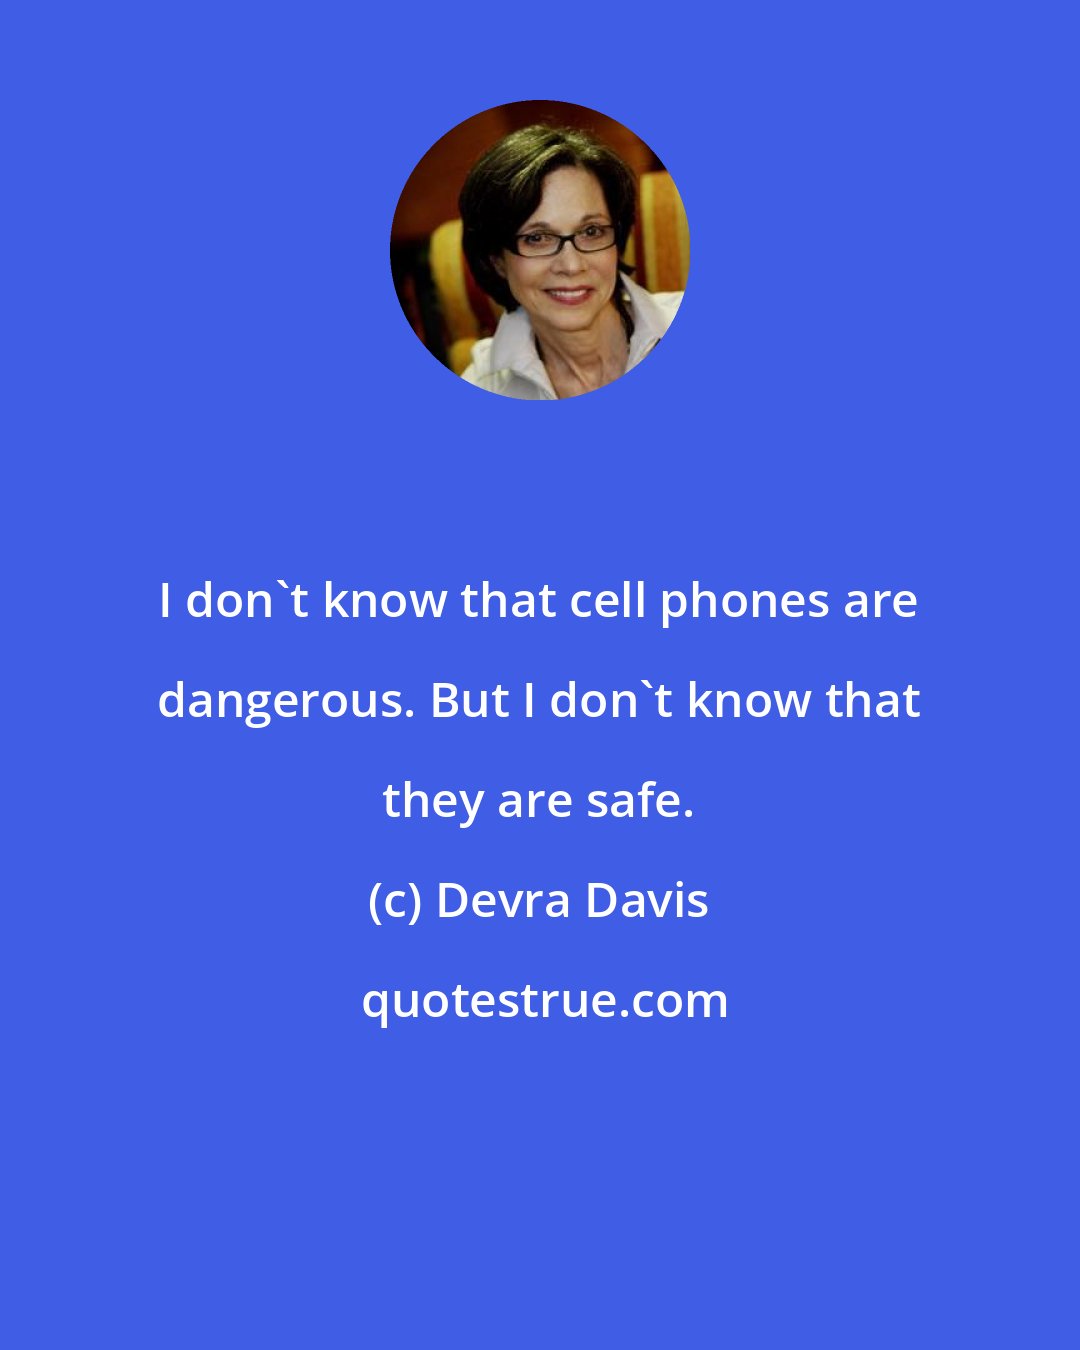 Devra Davis: I don't know that cell phones are dangerous. But I don't know that they are safe.